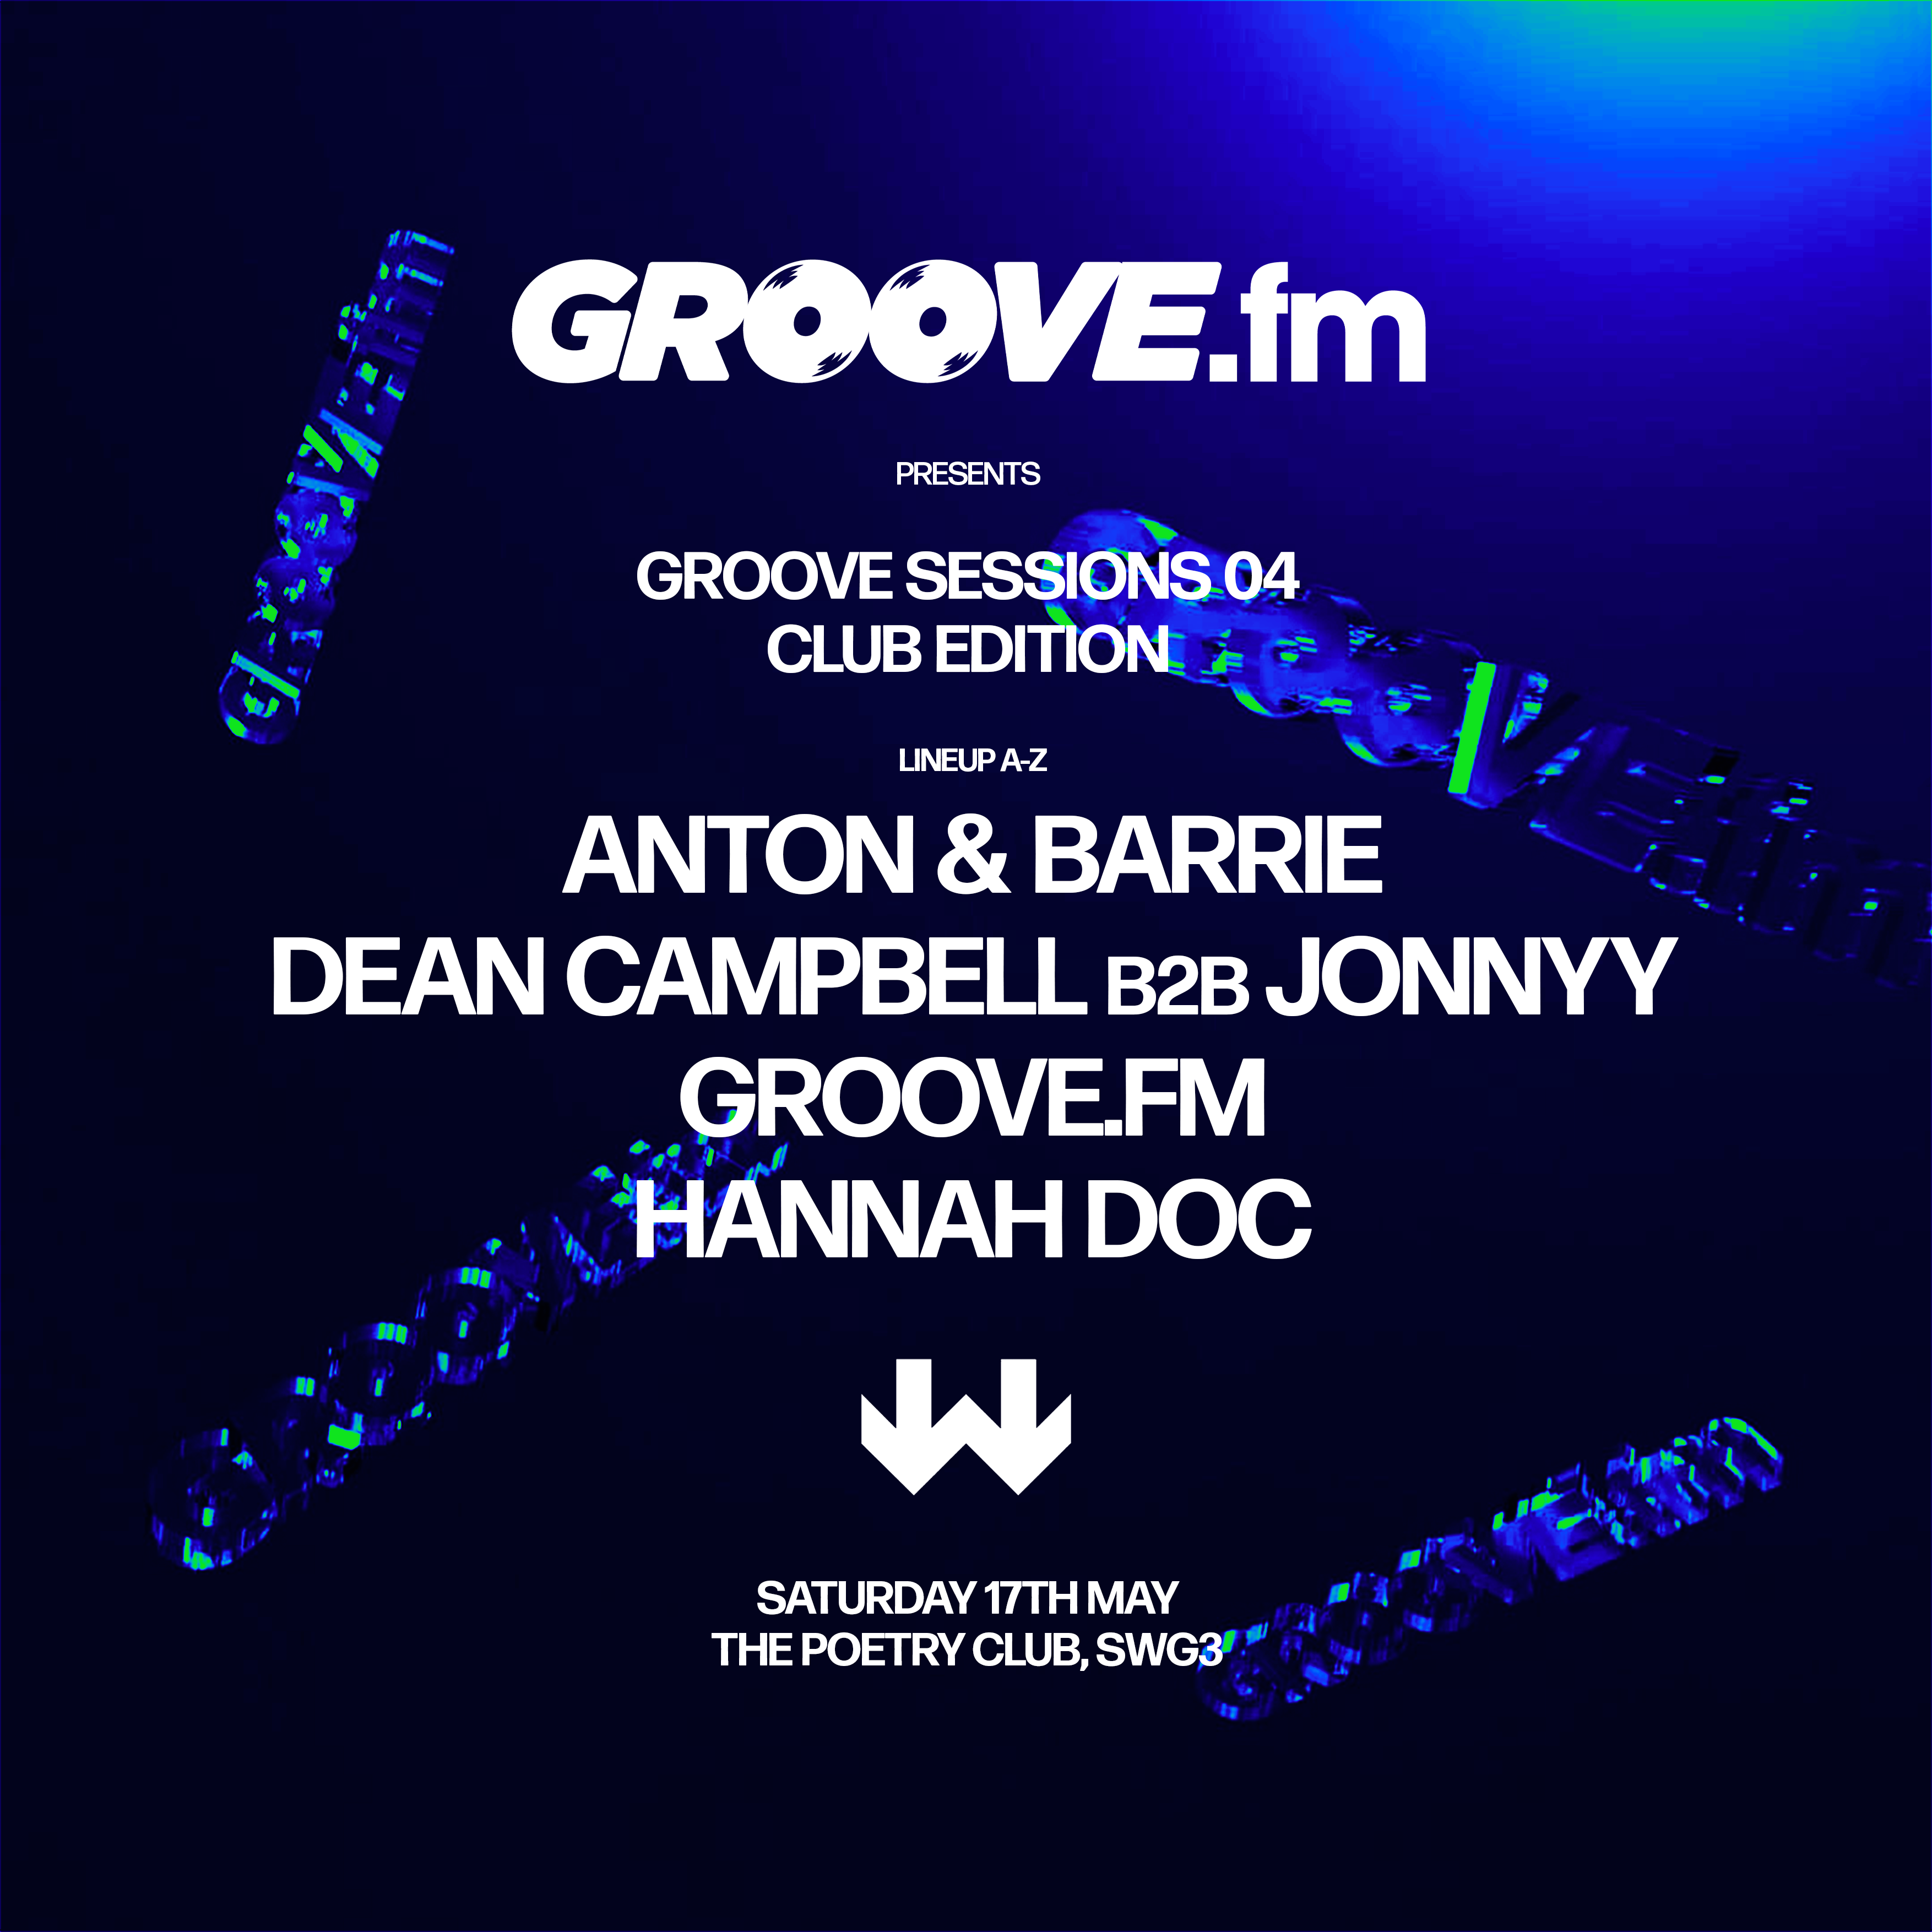 GROOVE.fm presents: Groove Sessions - フライヤー表